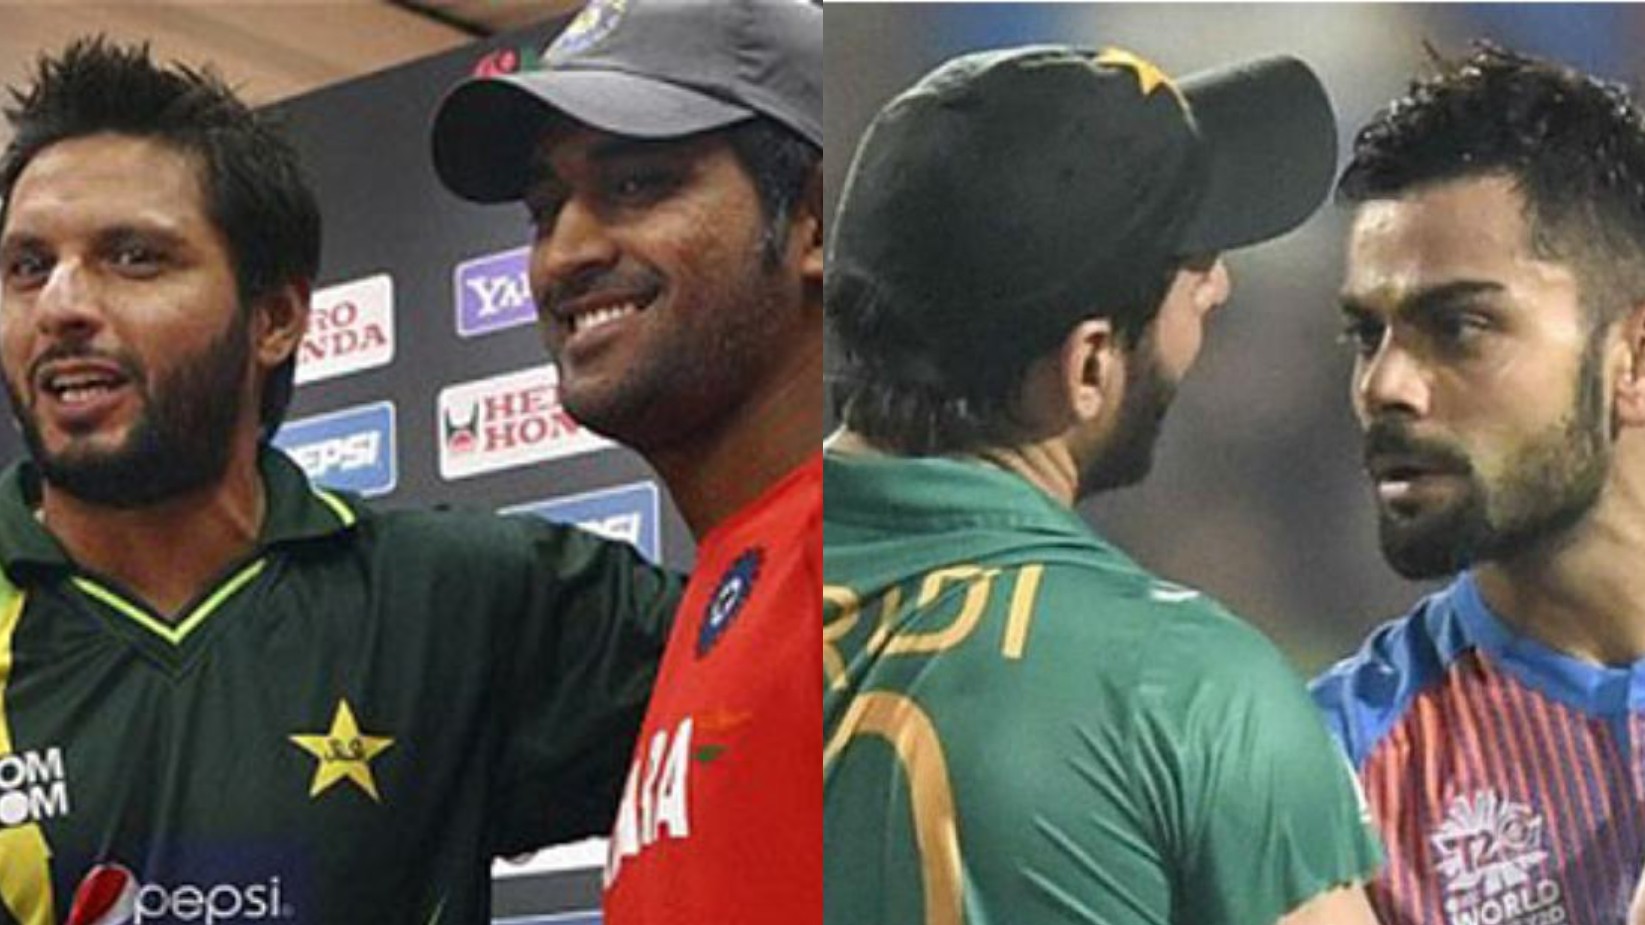 Shahid Afridi rues his rivalry with Virat Kohli began late; lauds MS Dhoni as “Hitter, finisher, keeper, soldier”